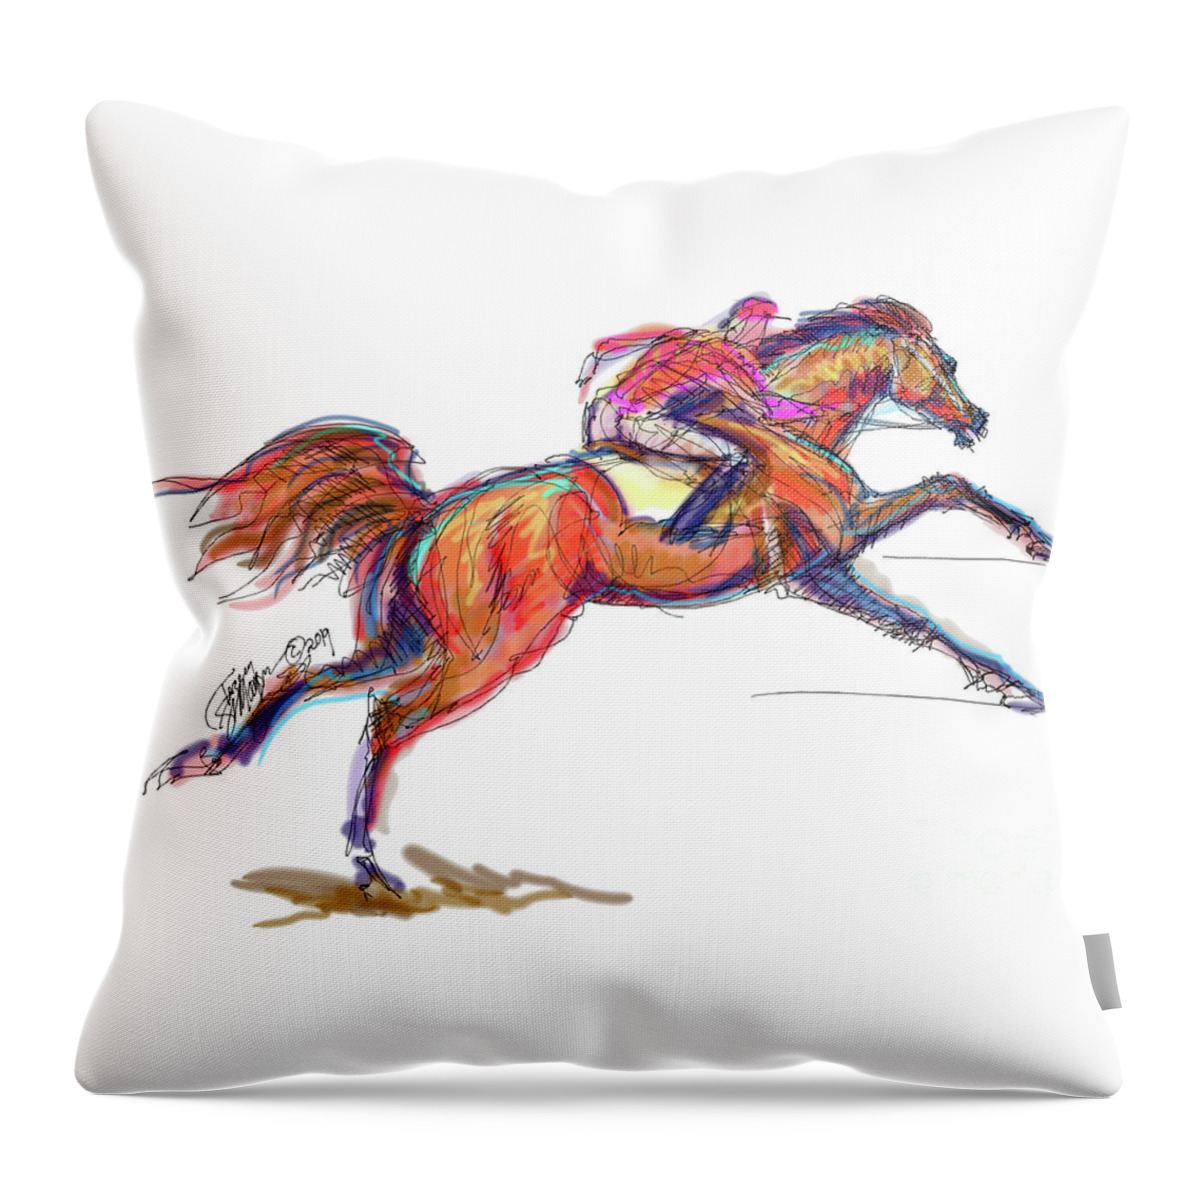 Thoroughbreds; Racehorses; Racing; Horse Race; Jockey; Degas; Contemporary Art; Contemporary Equine Art; Modern Equine Art; Equine Art Cards; Equine Art Gifts; Racehorse Gifts; Race Horse Mugs Throw Pillow featuring the digital art Race Horse for Julie June Stewart by Stacey Mayer